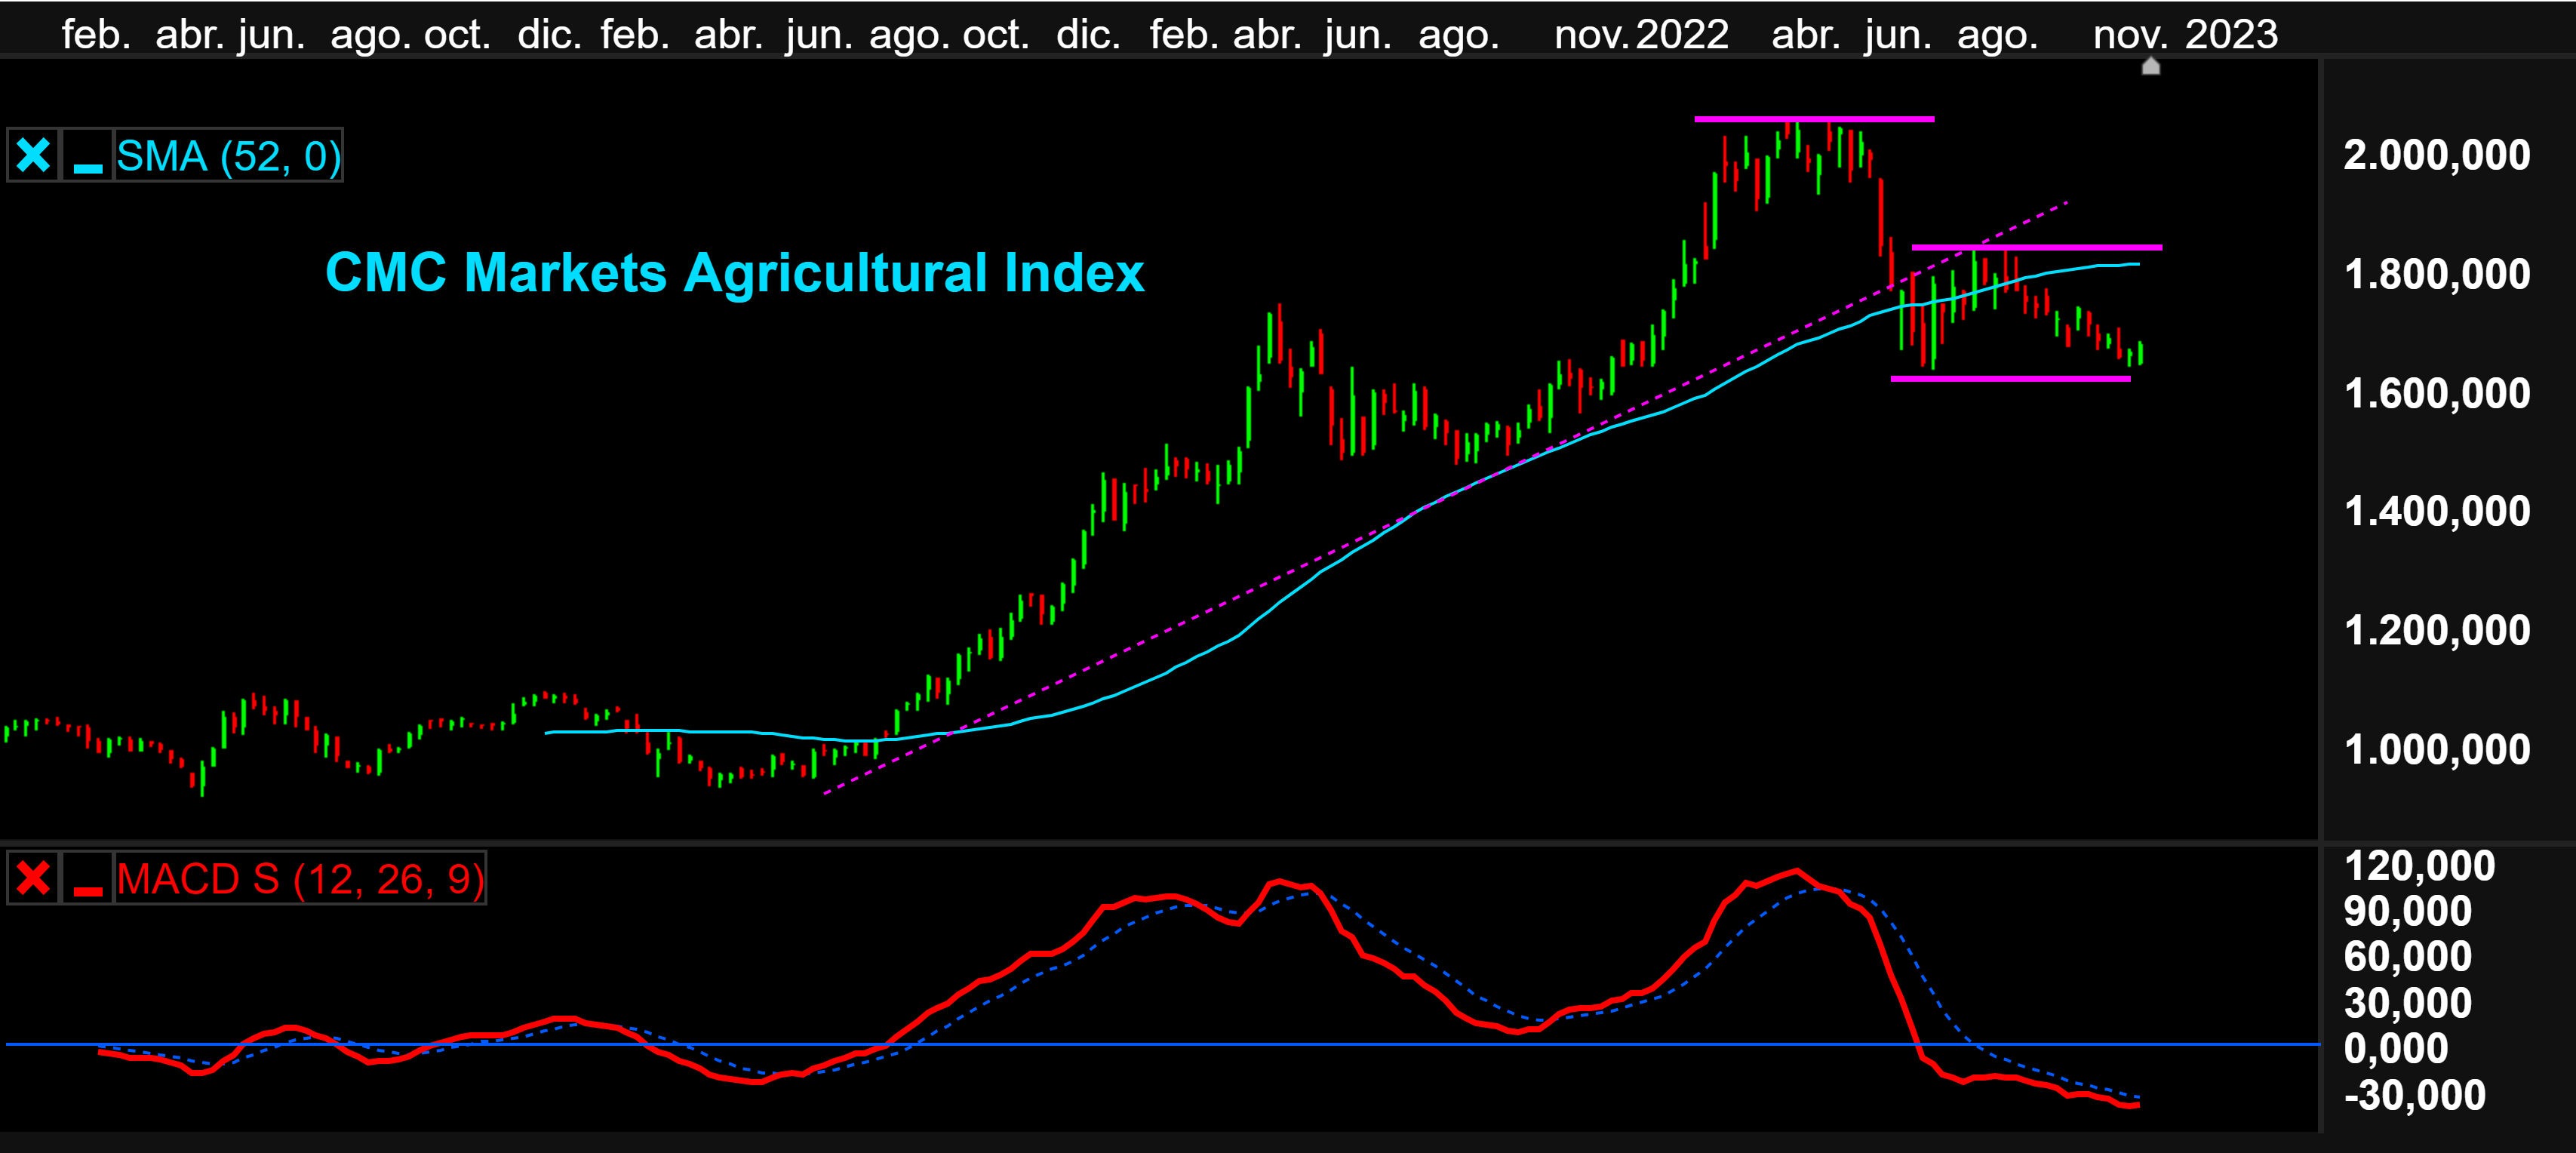 Grafico CMC Markets Agricultural Index